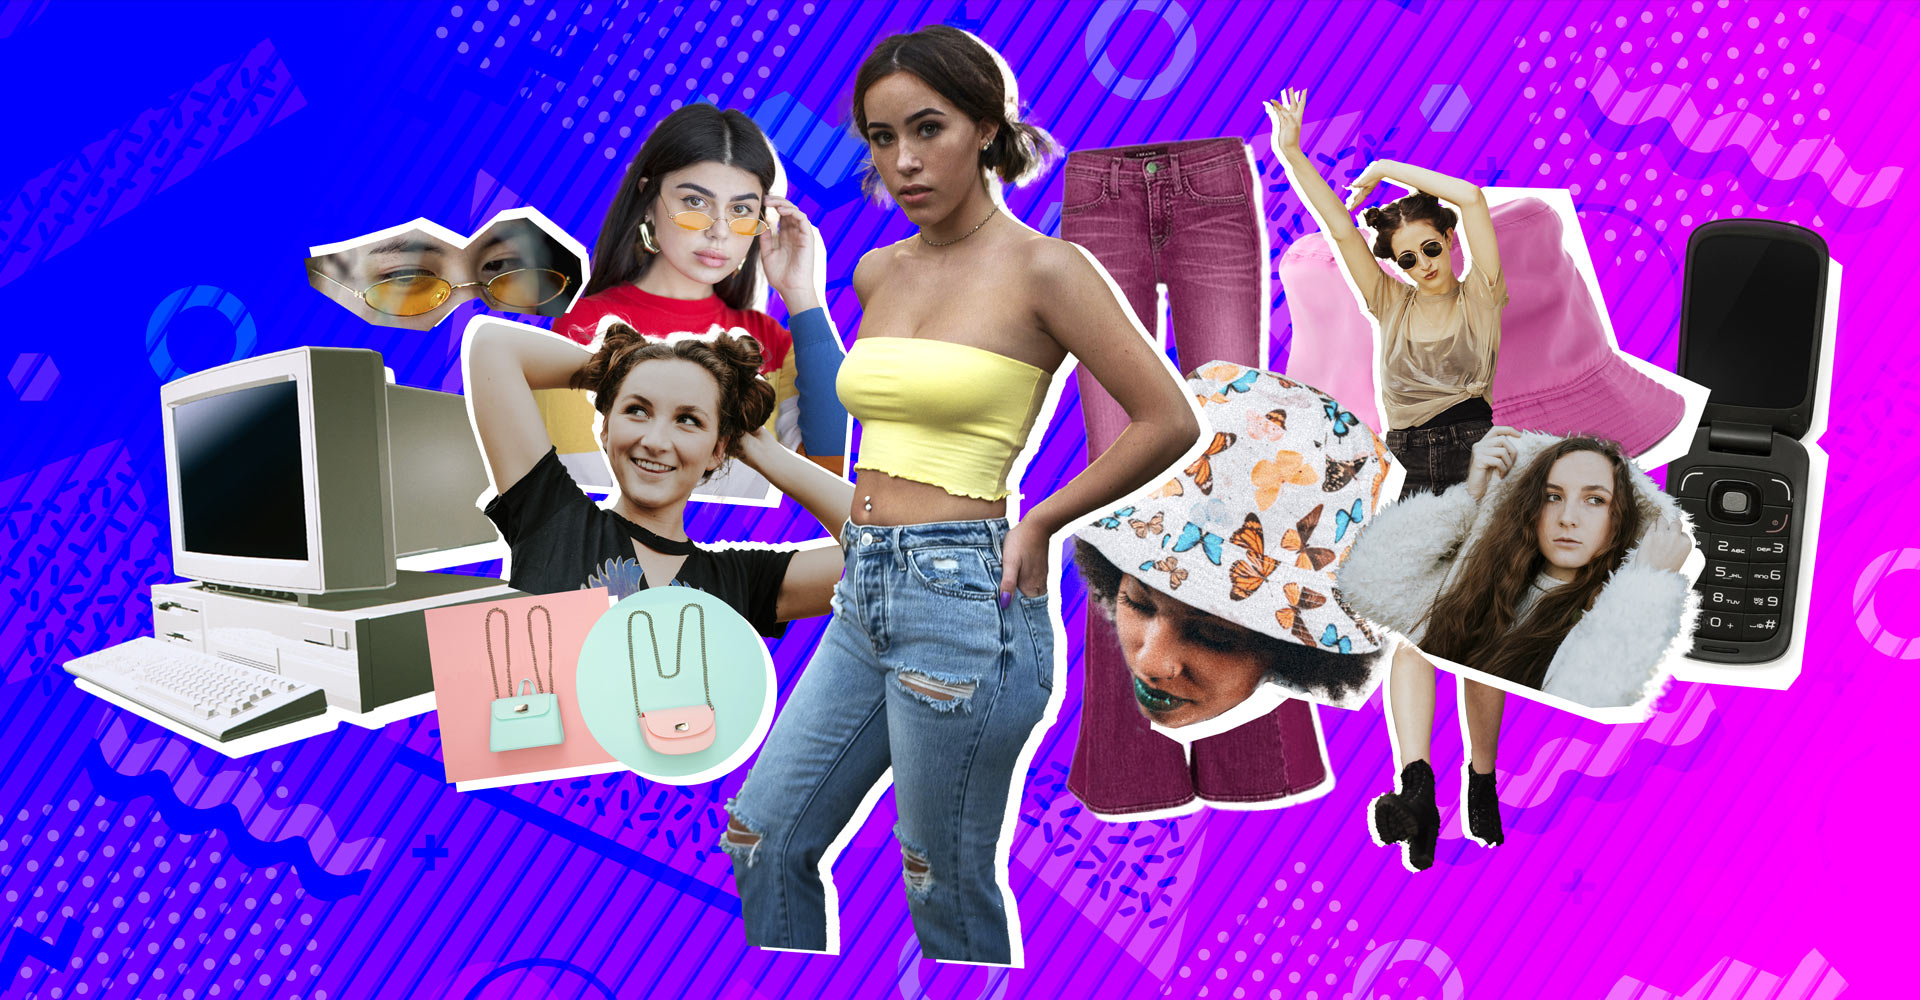 Y2K Aesthetic: Gen Z Is Reviving the 2000s Thin Obsession